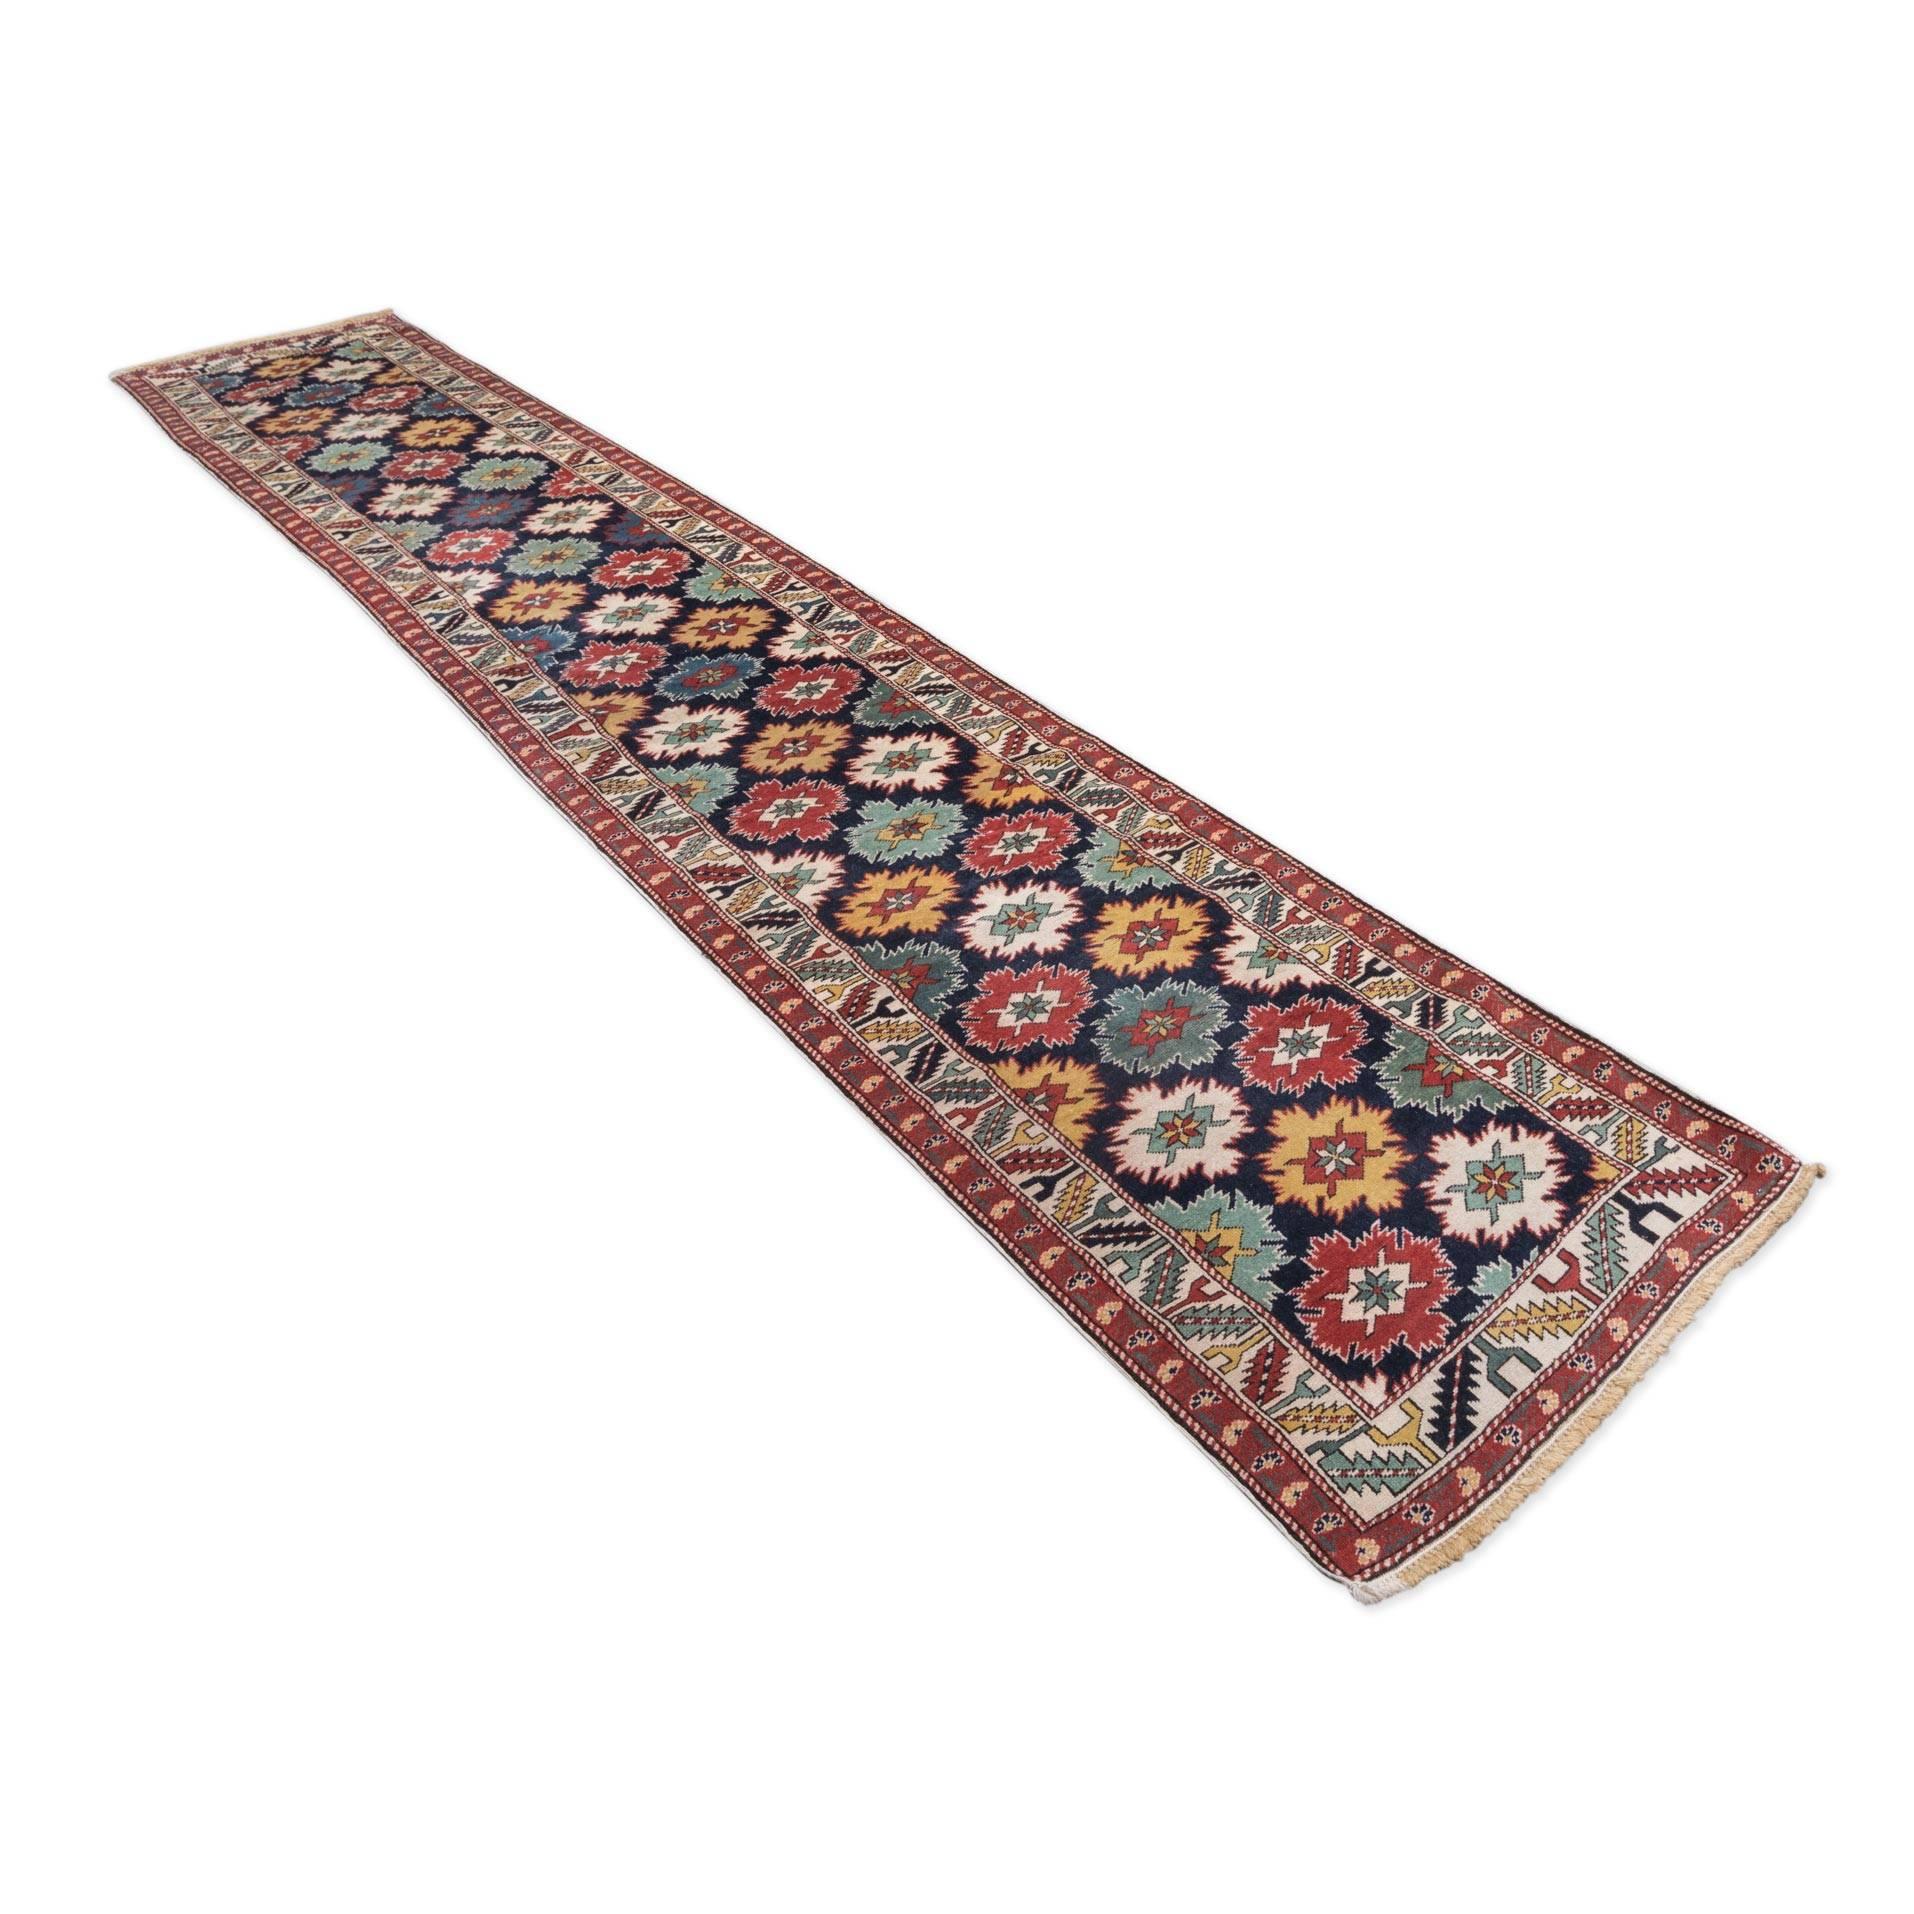 Hall rug of the Caucasus region.
- Made in the first quarter of the 20th century
- Typical design of this region, a succession of small format palmettes follow one another throughout the central field.
- Colors, in greens, yellows, reds and blues